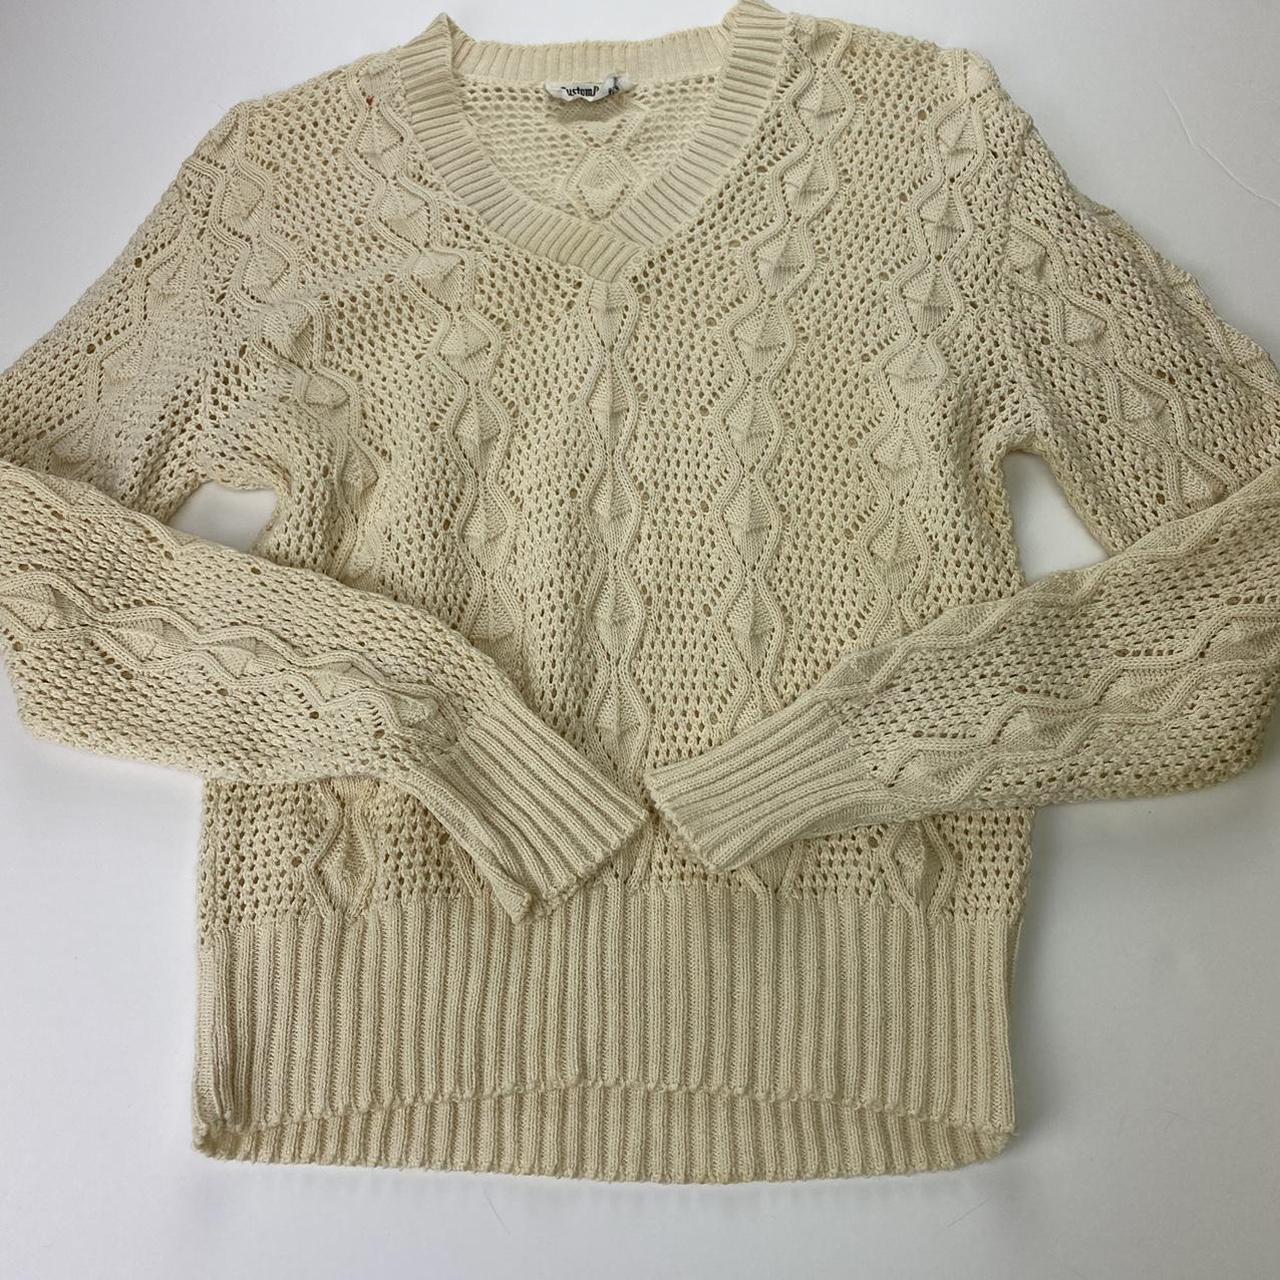 Product Image 2 - 🌨Flurry sweater🌨
Vintage 80s cream cableknit